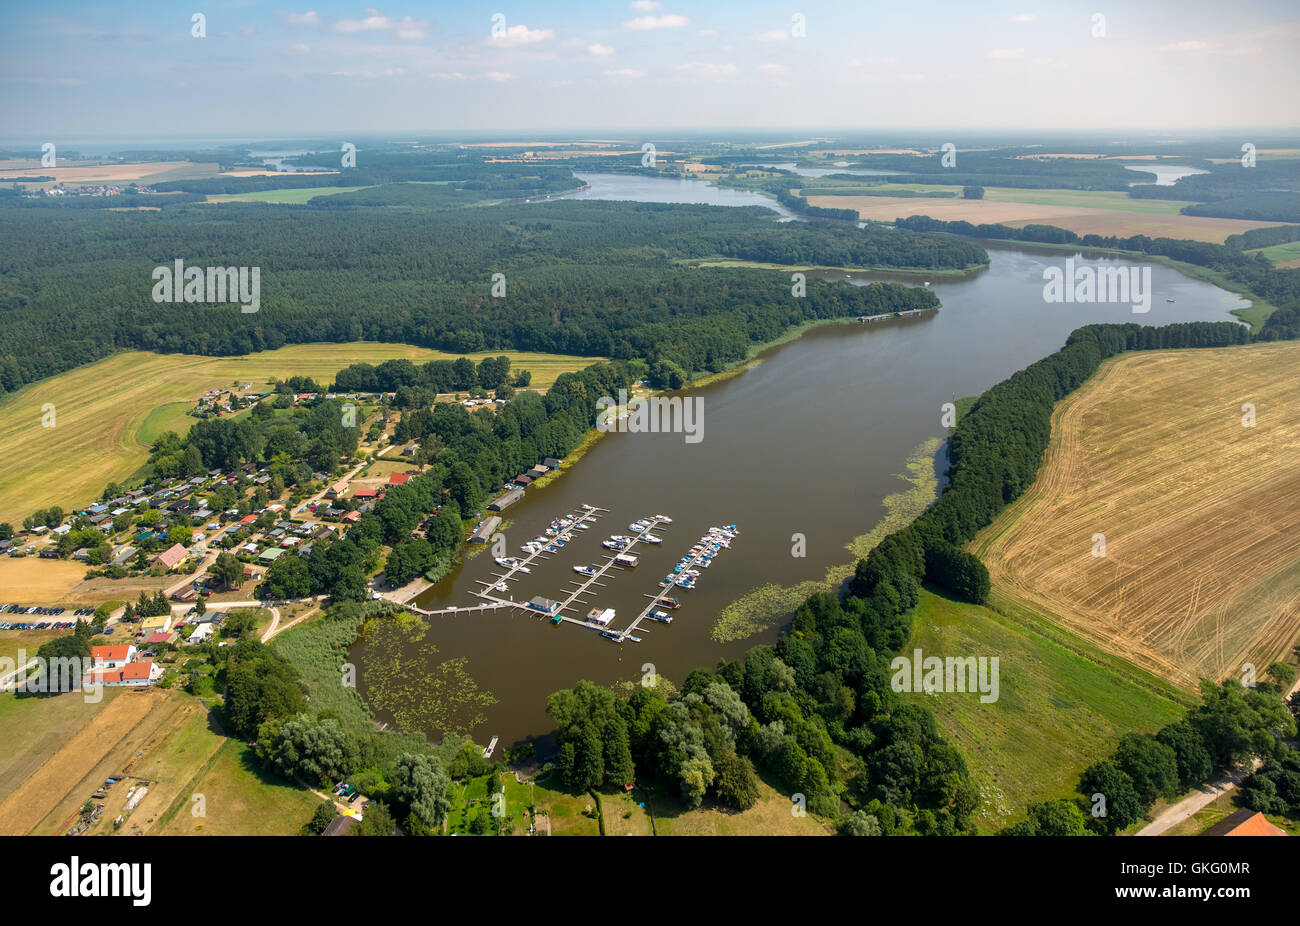 Aerial view, Buchholz with Müritzsee and jetties, marina Müritzsee, boat ramps, Mecklenburg Lakelands, Stock Photo